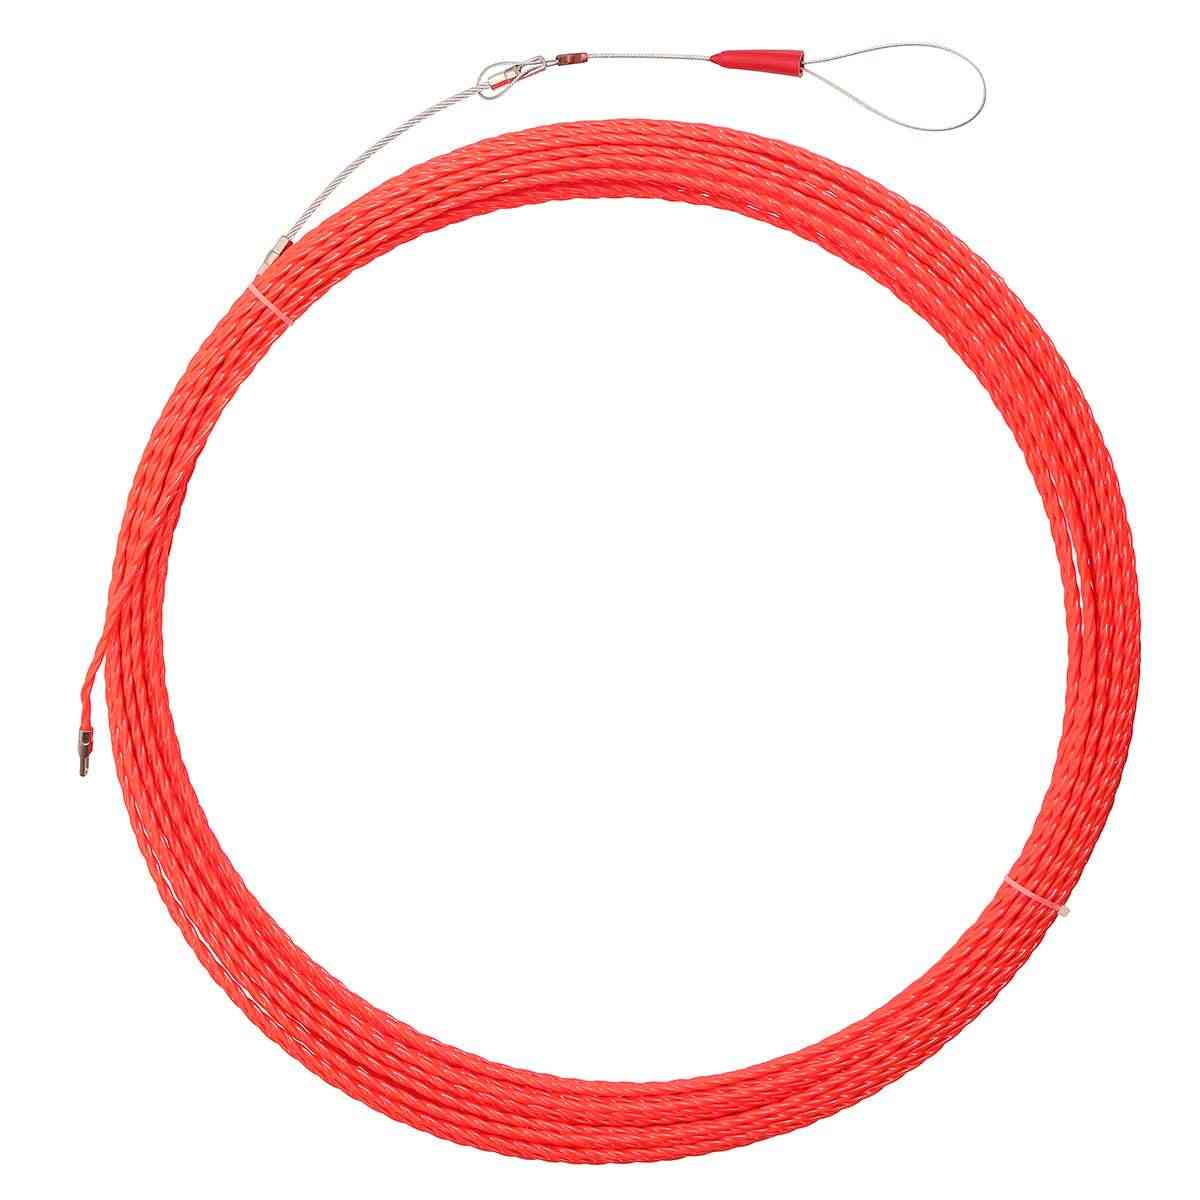 30m Nylon Snake Cable, Push Puller Fish Tape Reel Conduit Ducting Rodder Pulling Pullerwire